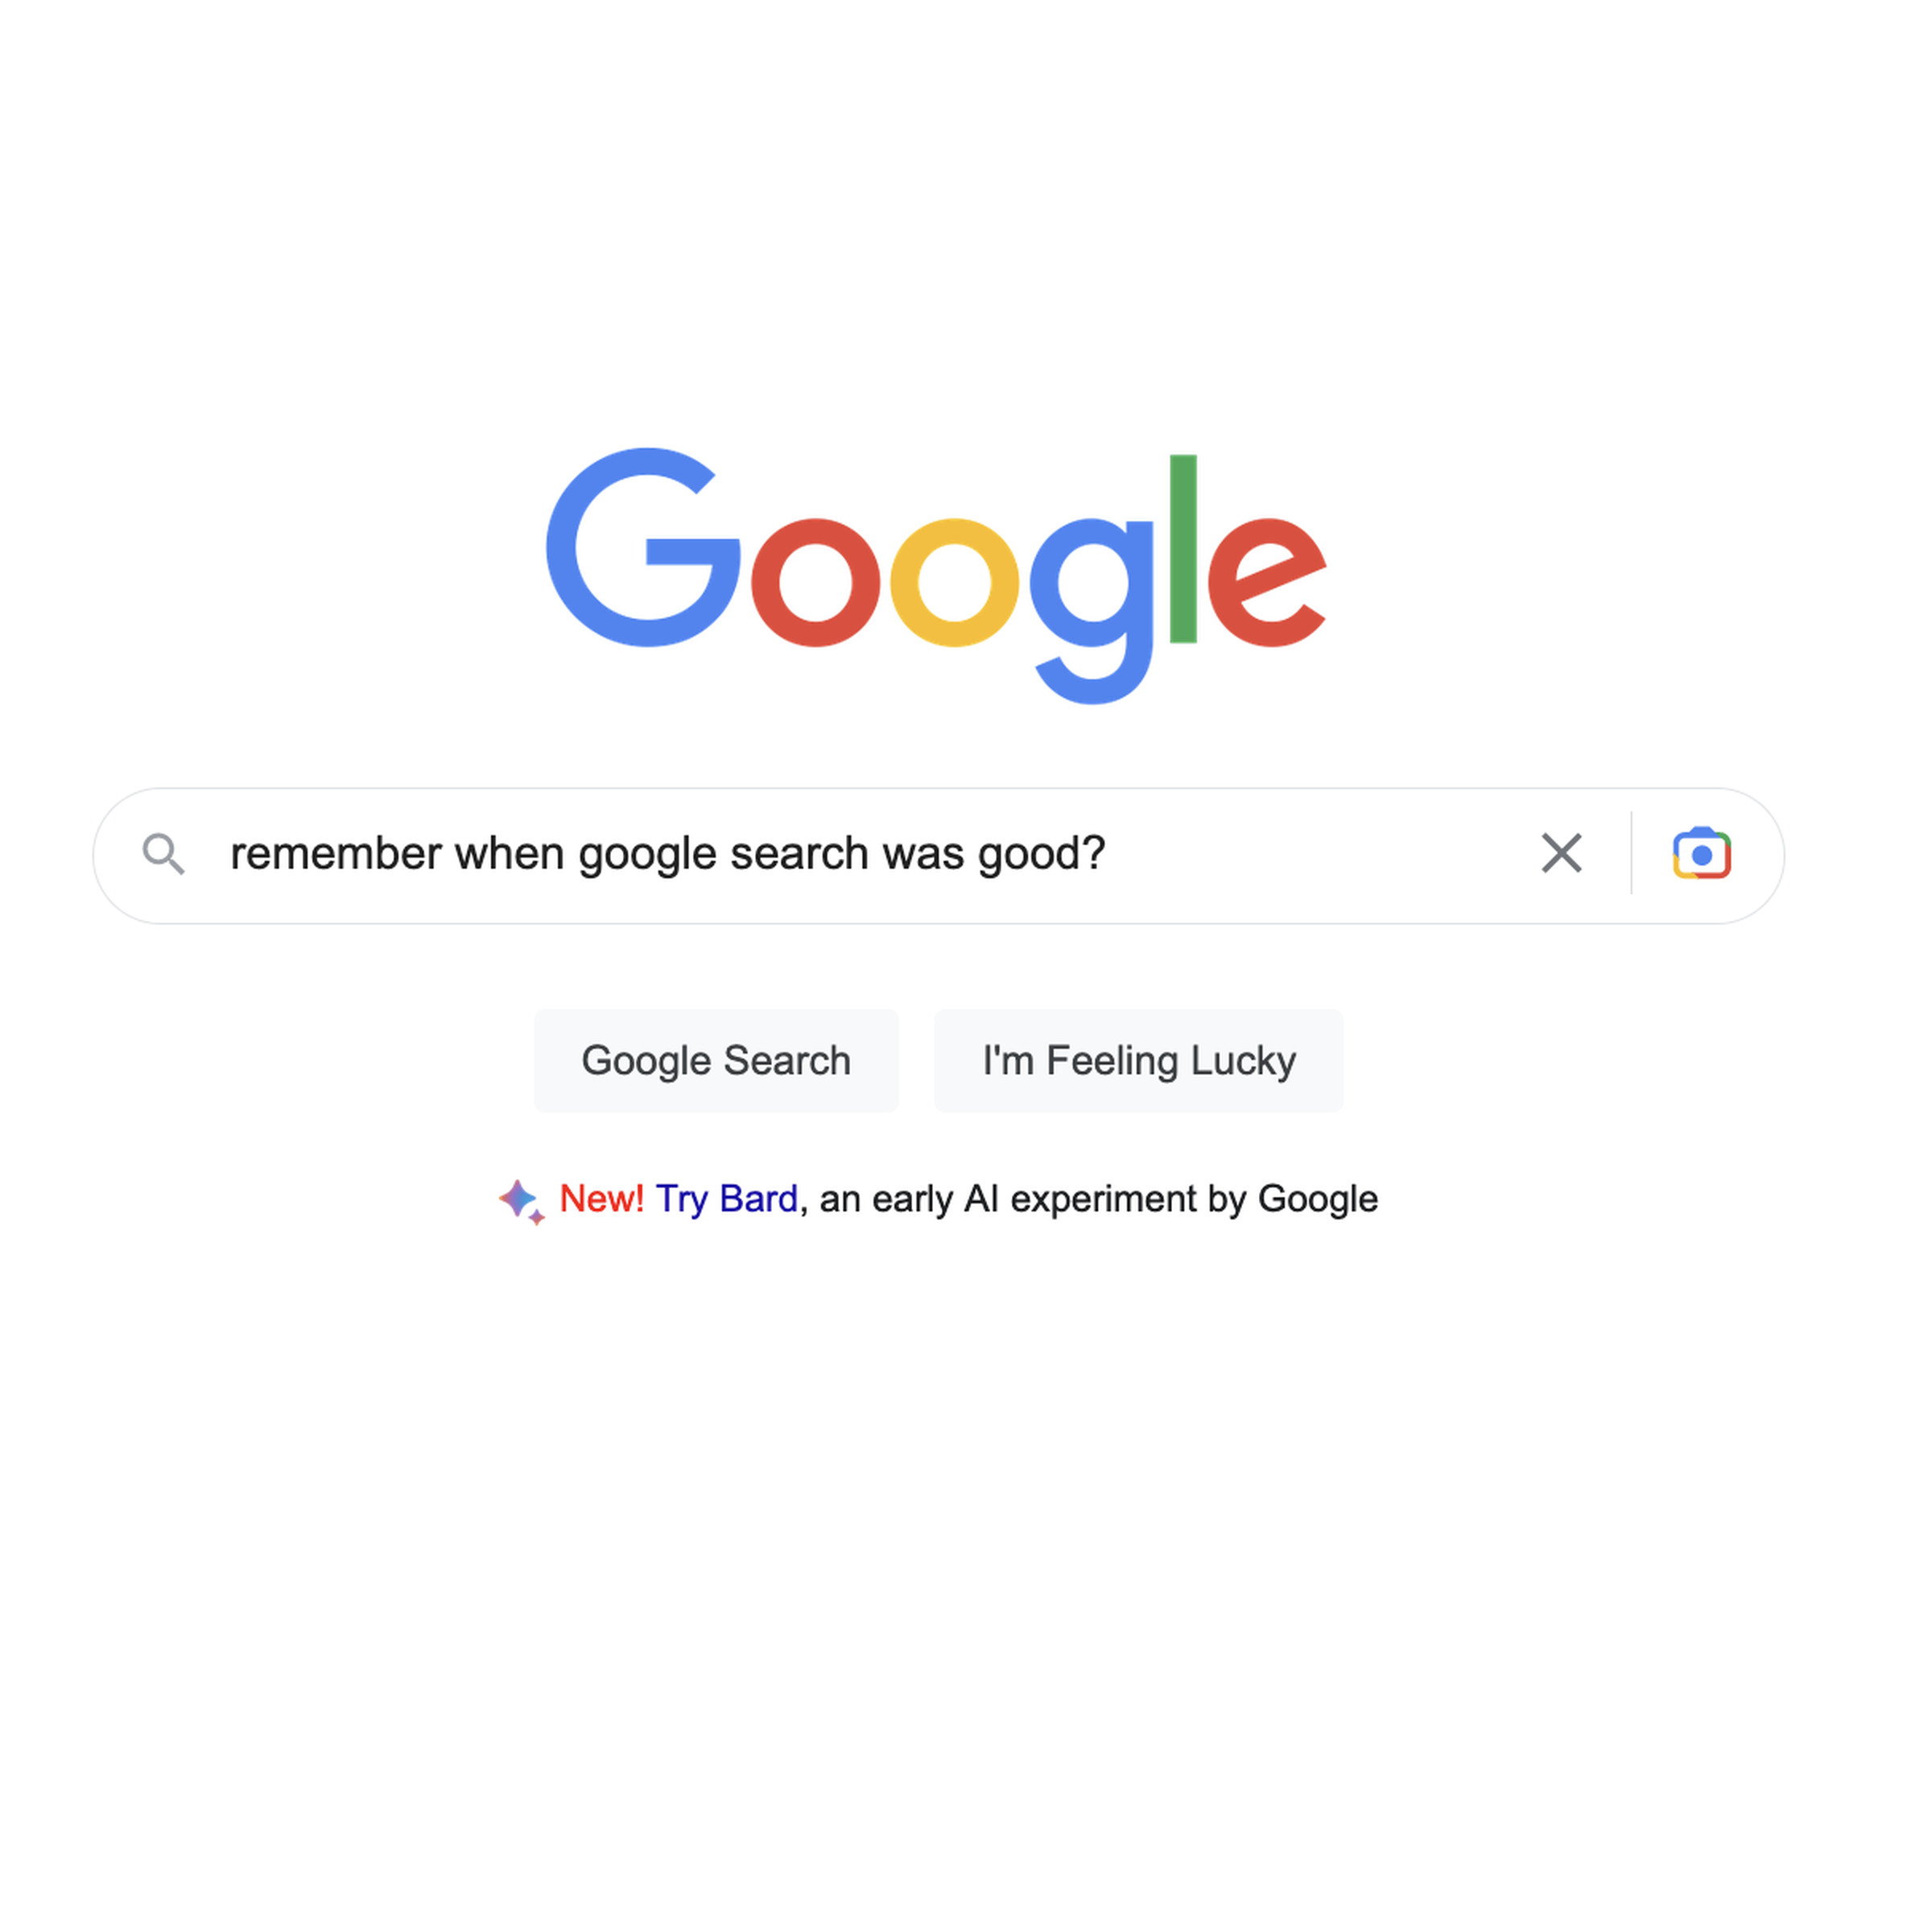 A screenshot of a Google search query. The query is “remember when google search was good?”